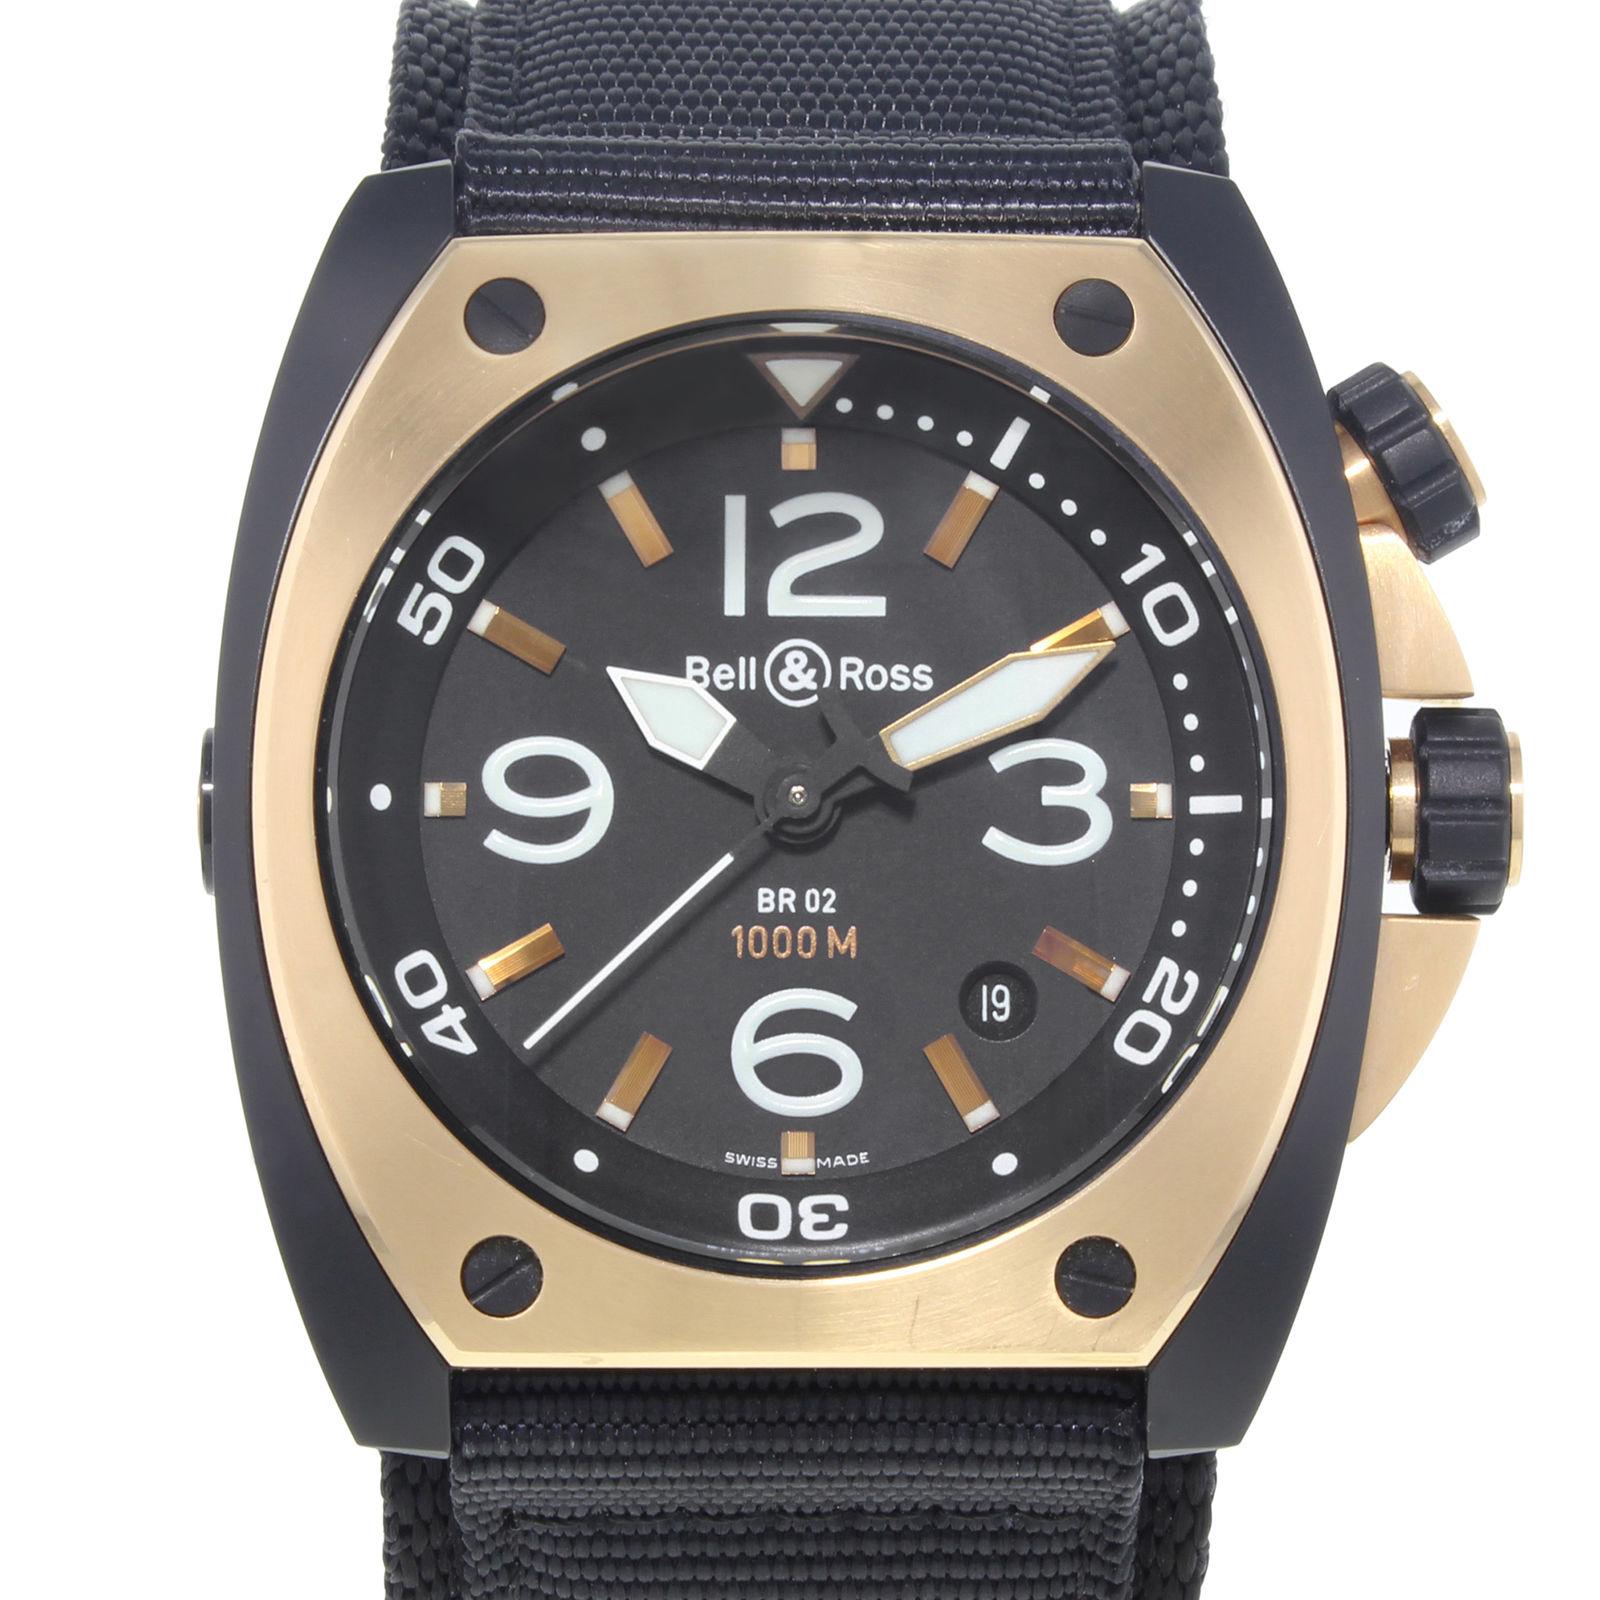 This display model Bell & Ross Marine  BR02‑PINK GOLD‑CA is a beautiful men's timepiece that is powered by an automatic movement which is cased in a stainless steel case. It has a tonneau shape face, date dial, and has hand sticks & numerals style